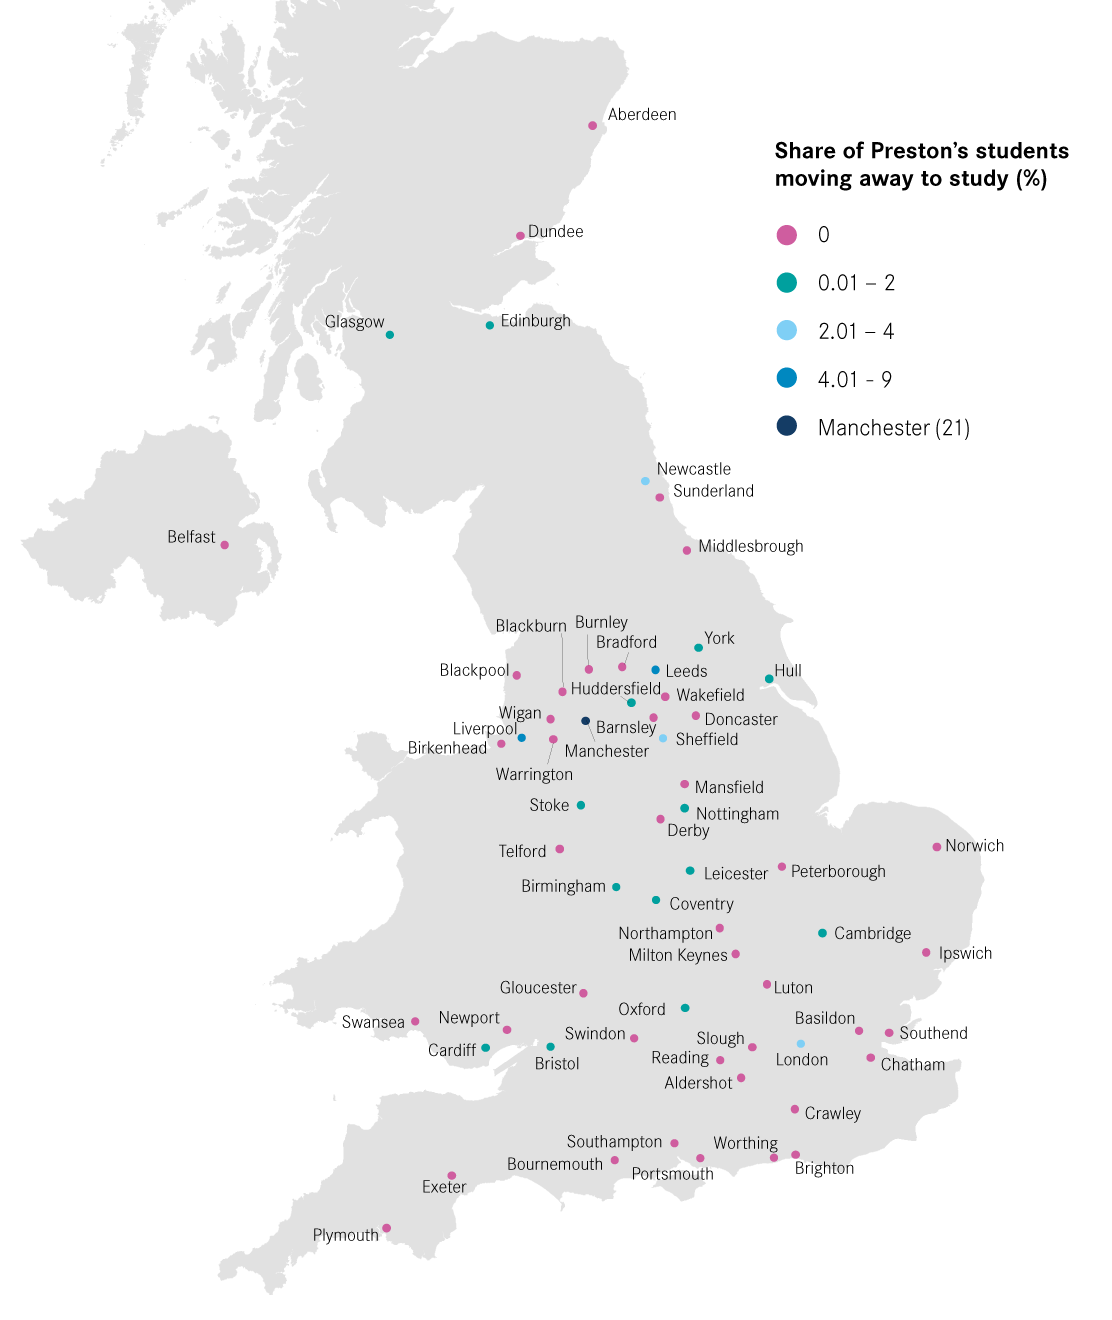 11: UK cities which Preston’s students move to for university, 2014/15